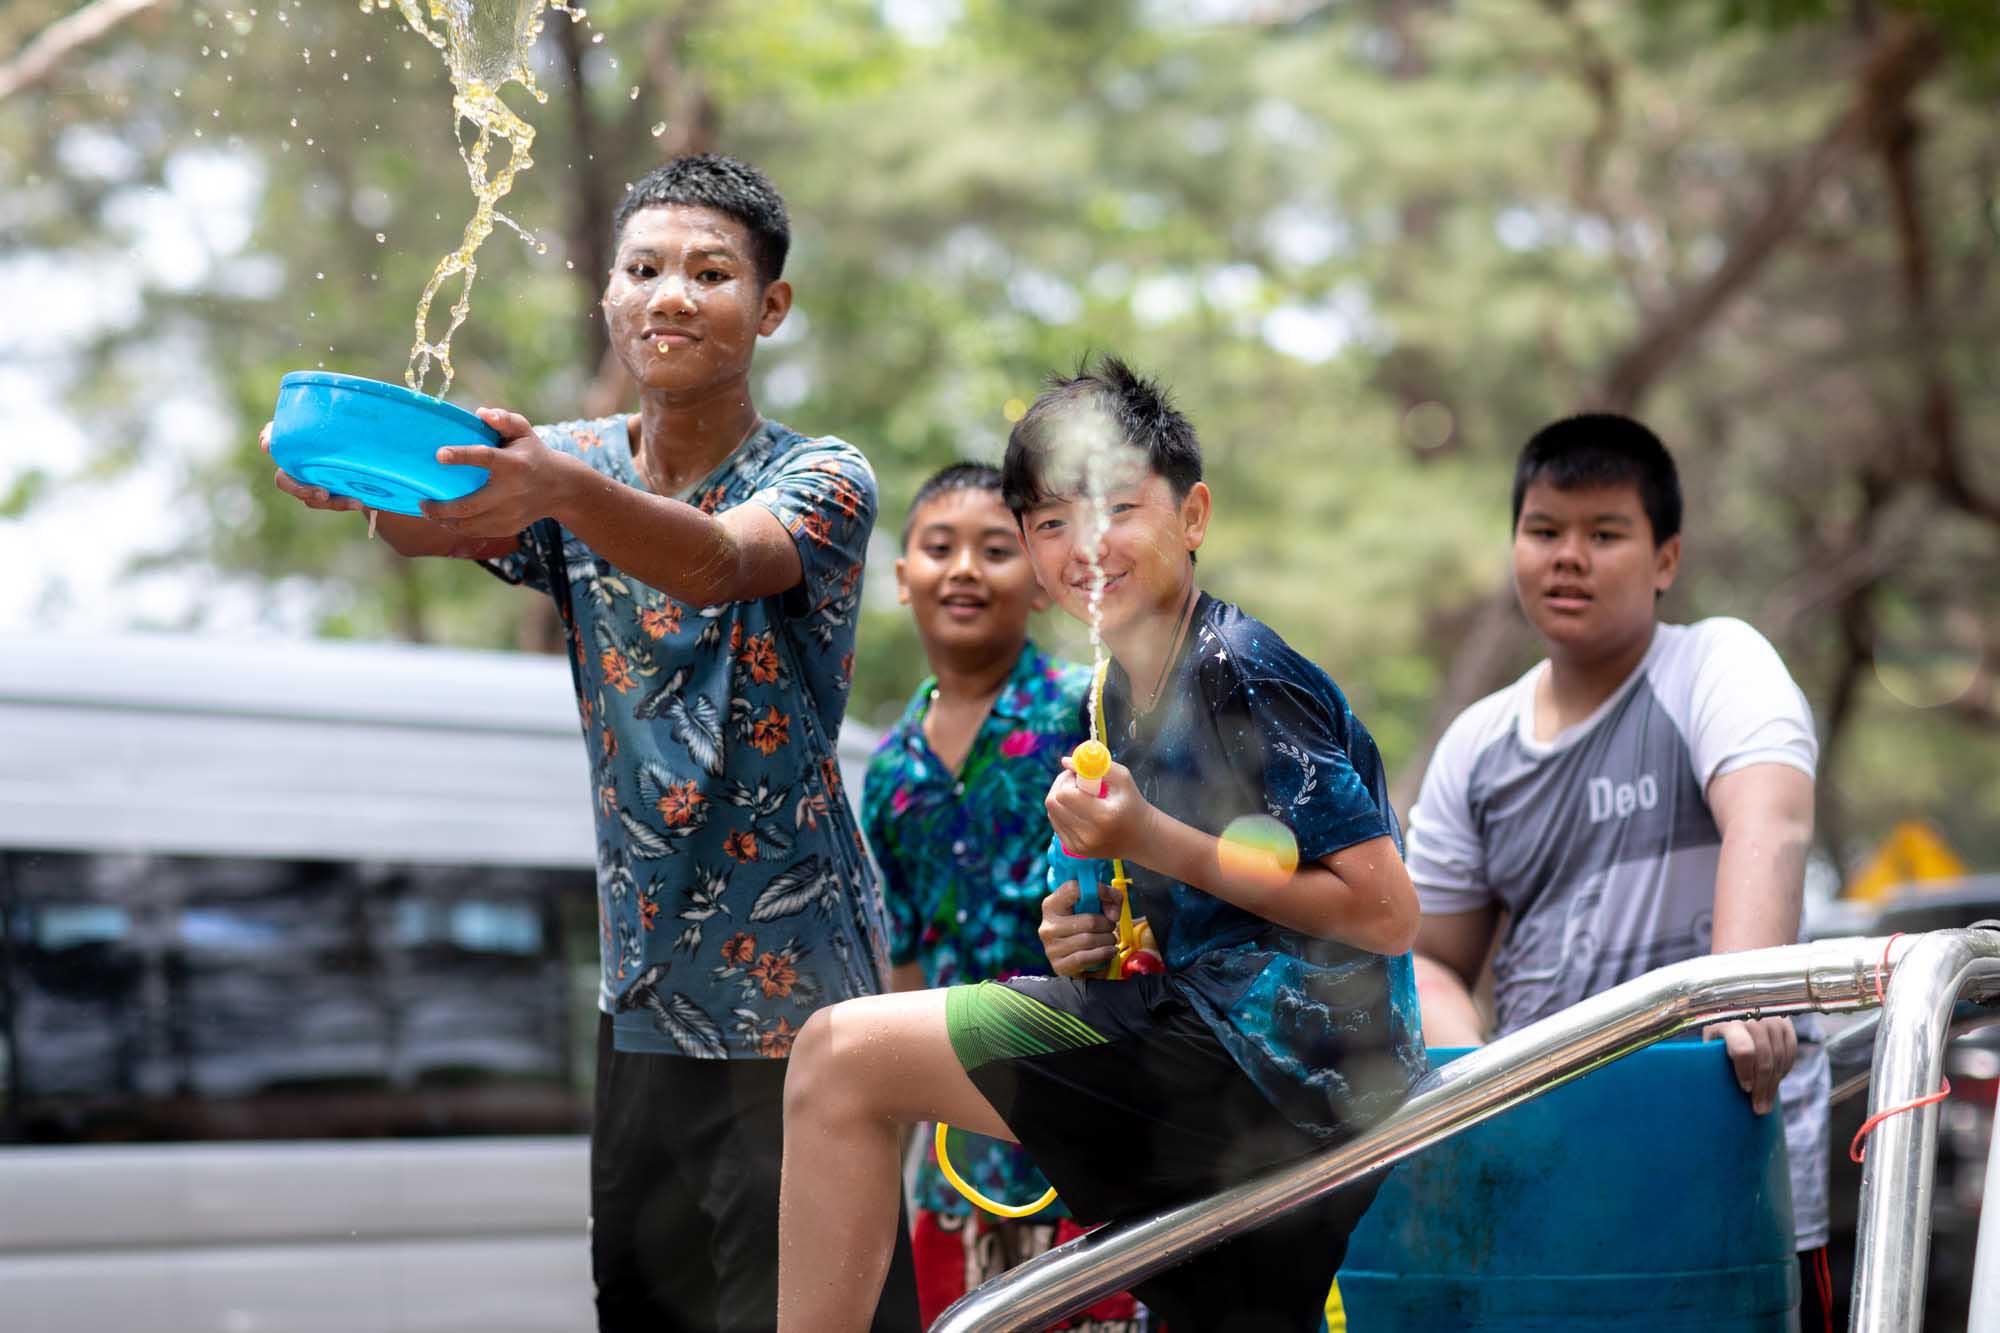 Four boys squirt water at photographer during Songkran water festival in Phuket, Thailand | Street Photography | Travel Photography | Festival Photography